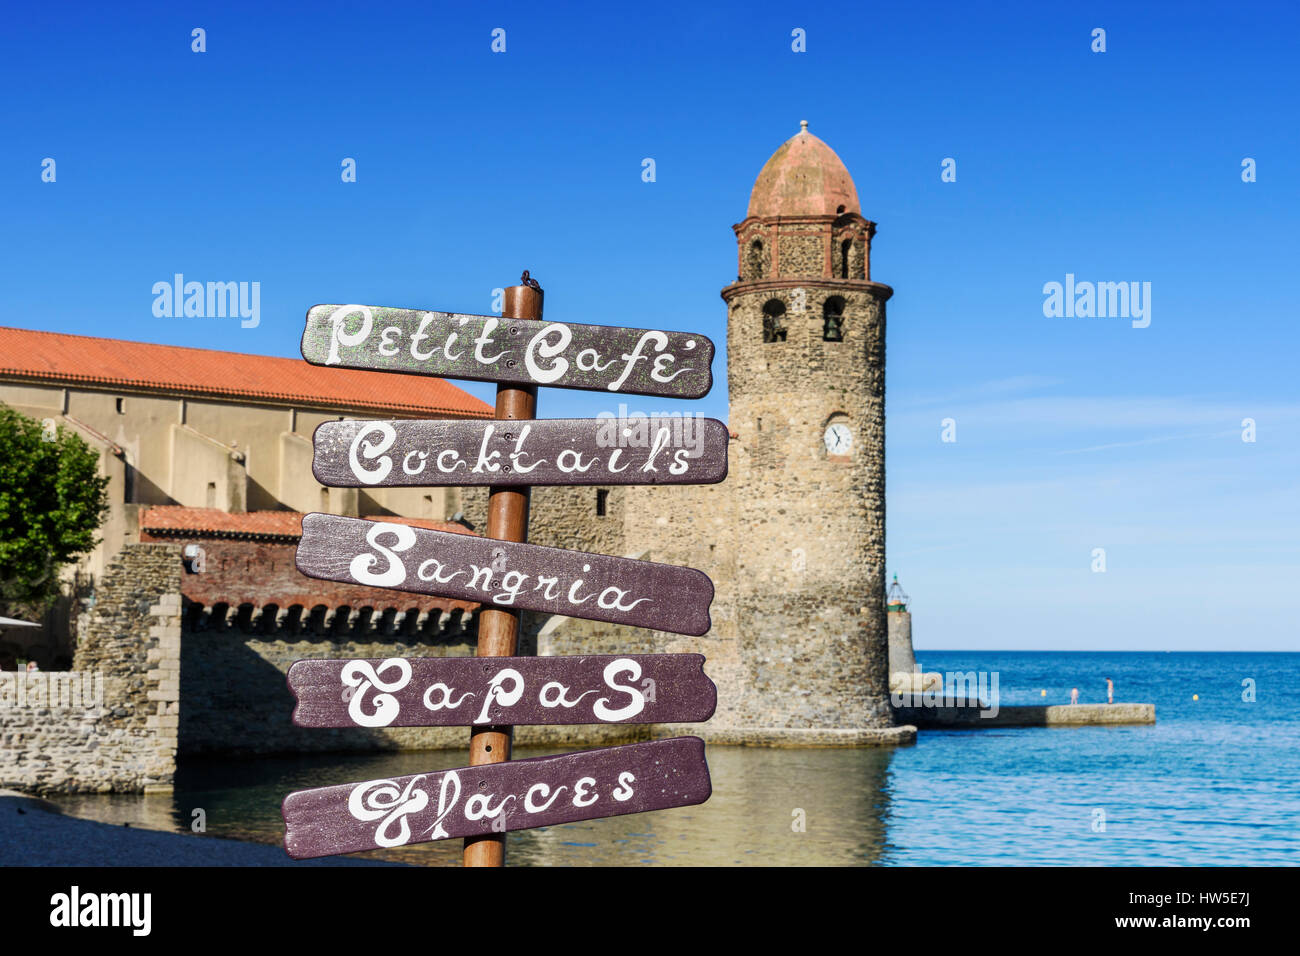 Focus on a cafe sign at a beachside cafe overlooked by the bell tower of the Church of Notre Dame des Anges, Collioure, Côte Vermeille, France Stock Photo